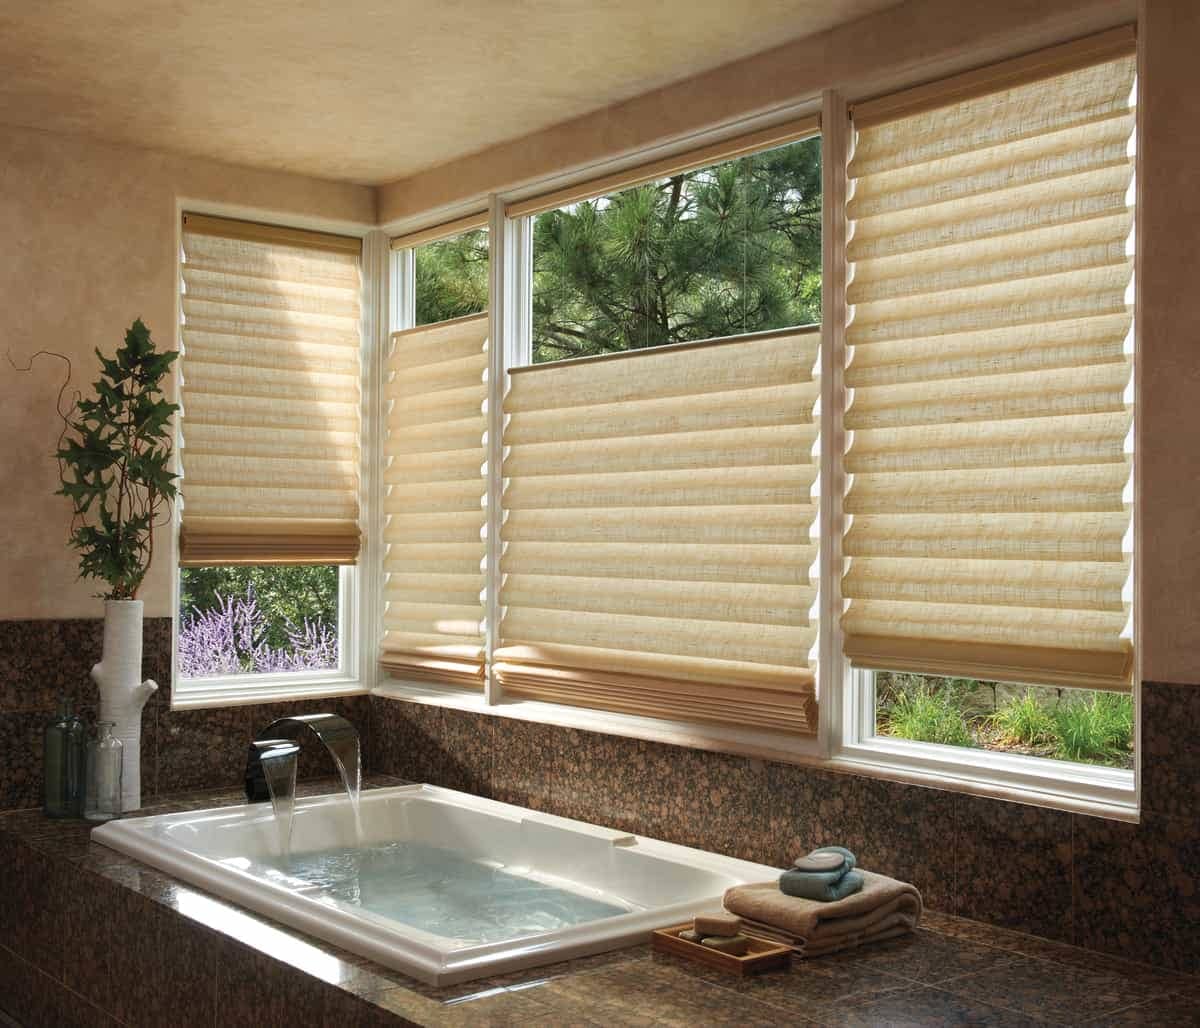 How to Style Windows with Roman Shades for Homes in Southlake, Texas (TX) like Custom Vignette.